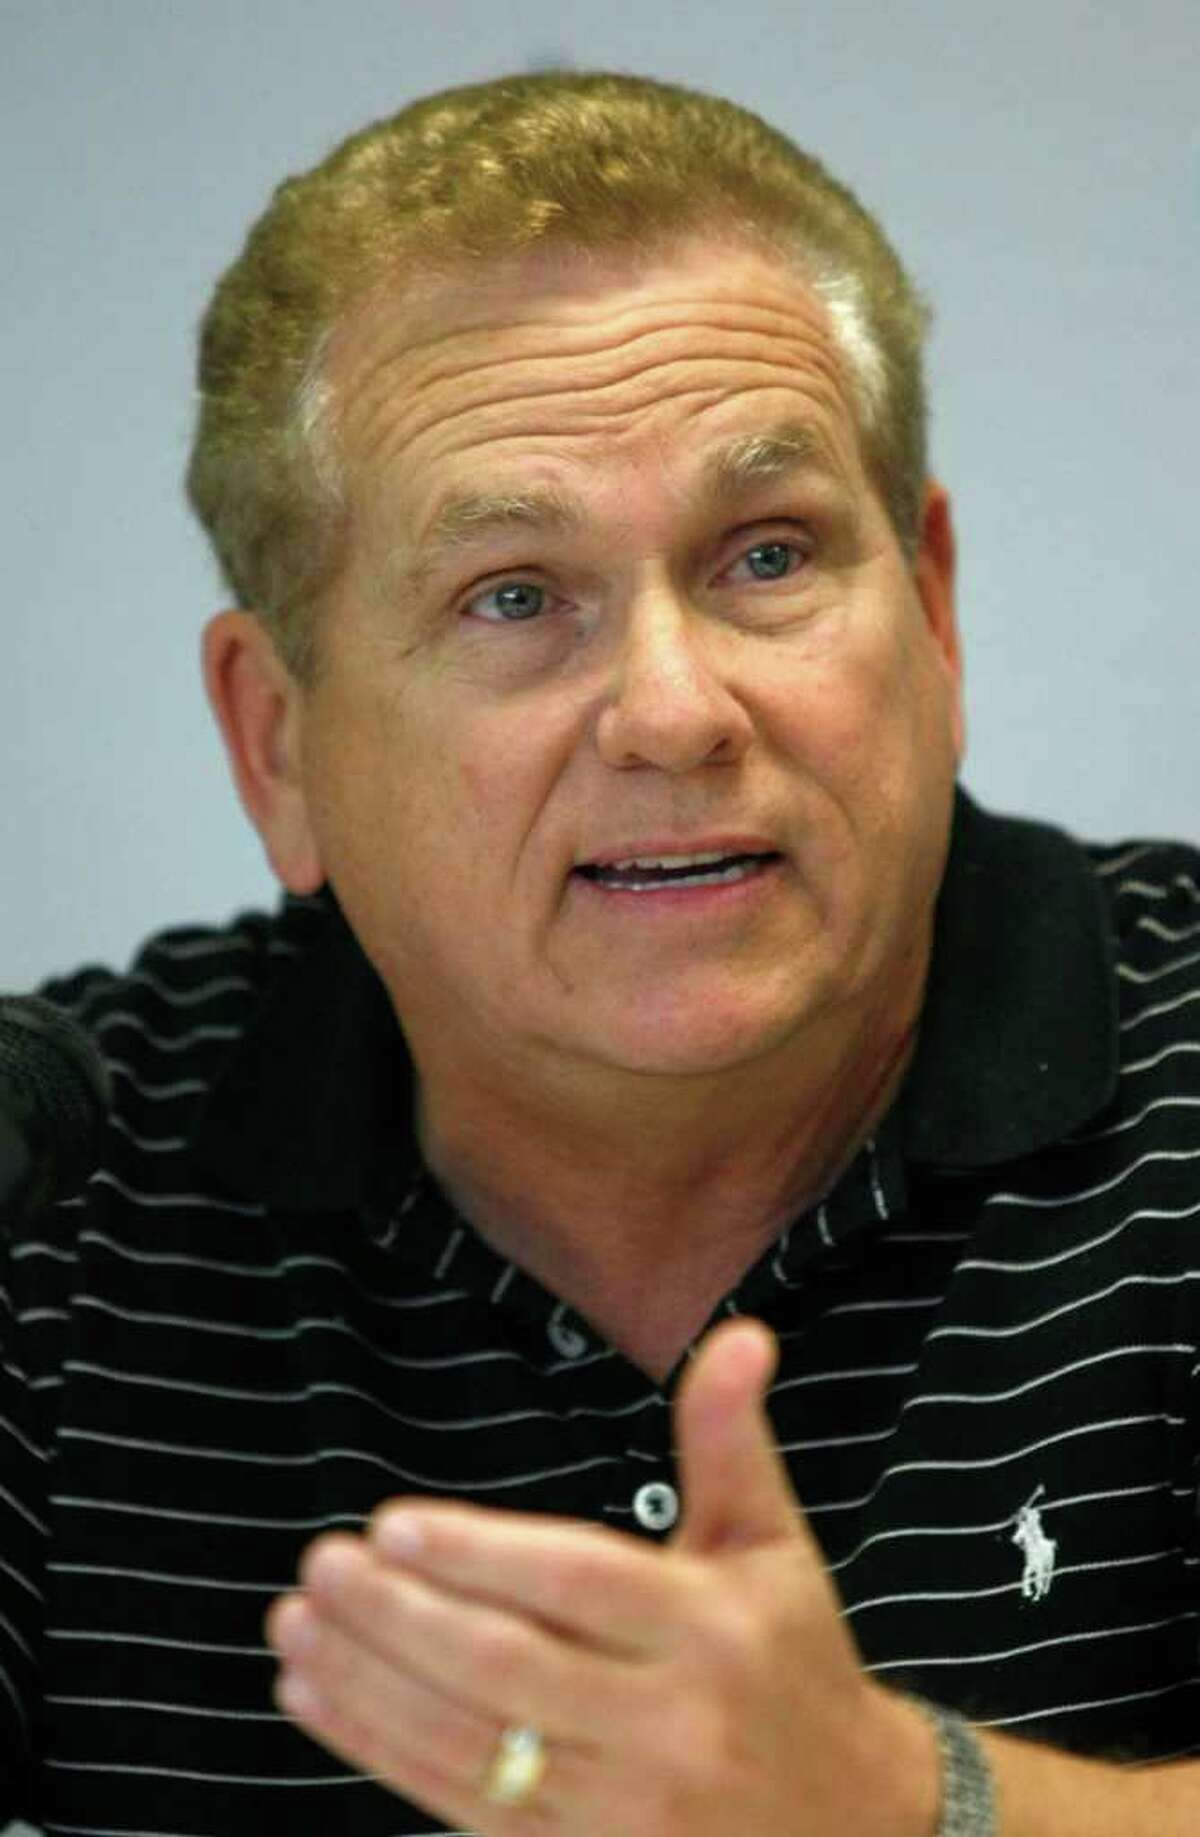 Dallas Cowboys Dave Campo speaks to reporters during a press conference at Valley Ranch in Irving, Texas, on Tuesday, January 29, 2008. Campo will return to the Cowboys' organization as an assistant coach. (Kelley Chinn/Fort Worth Star-Telegram/MCT)